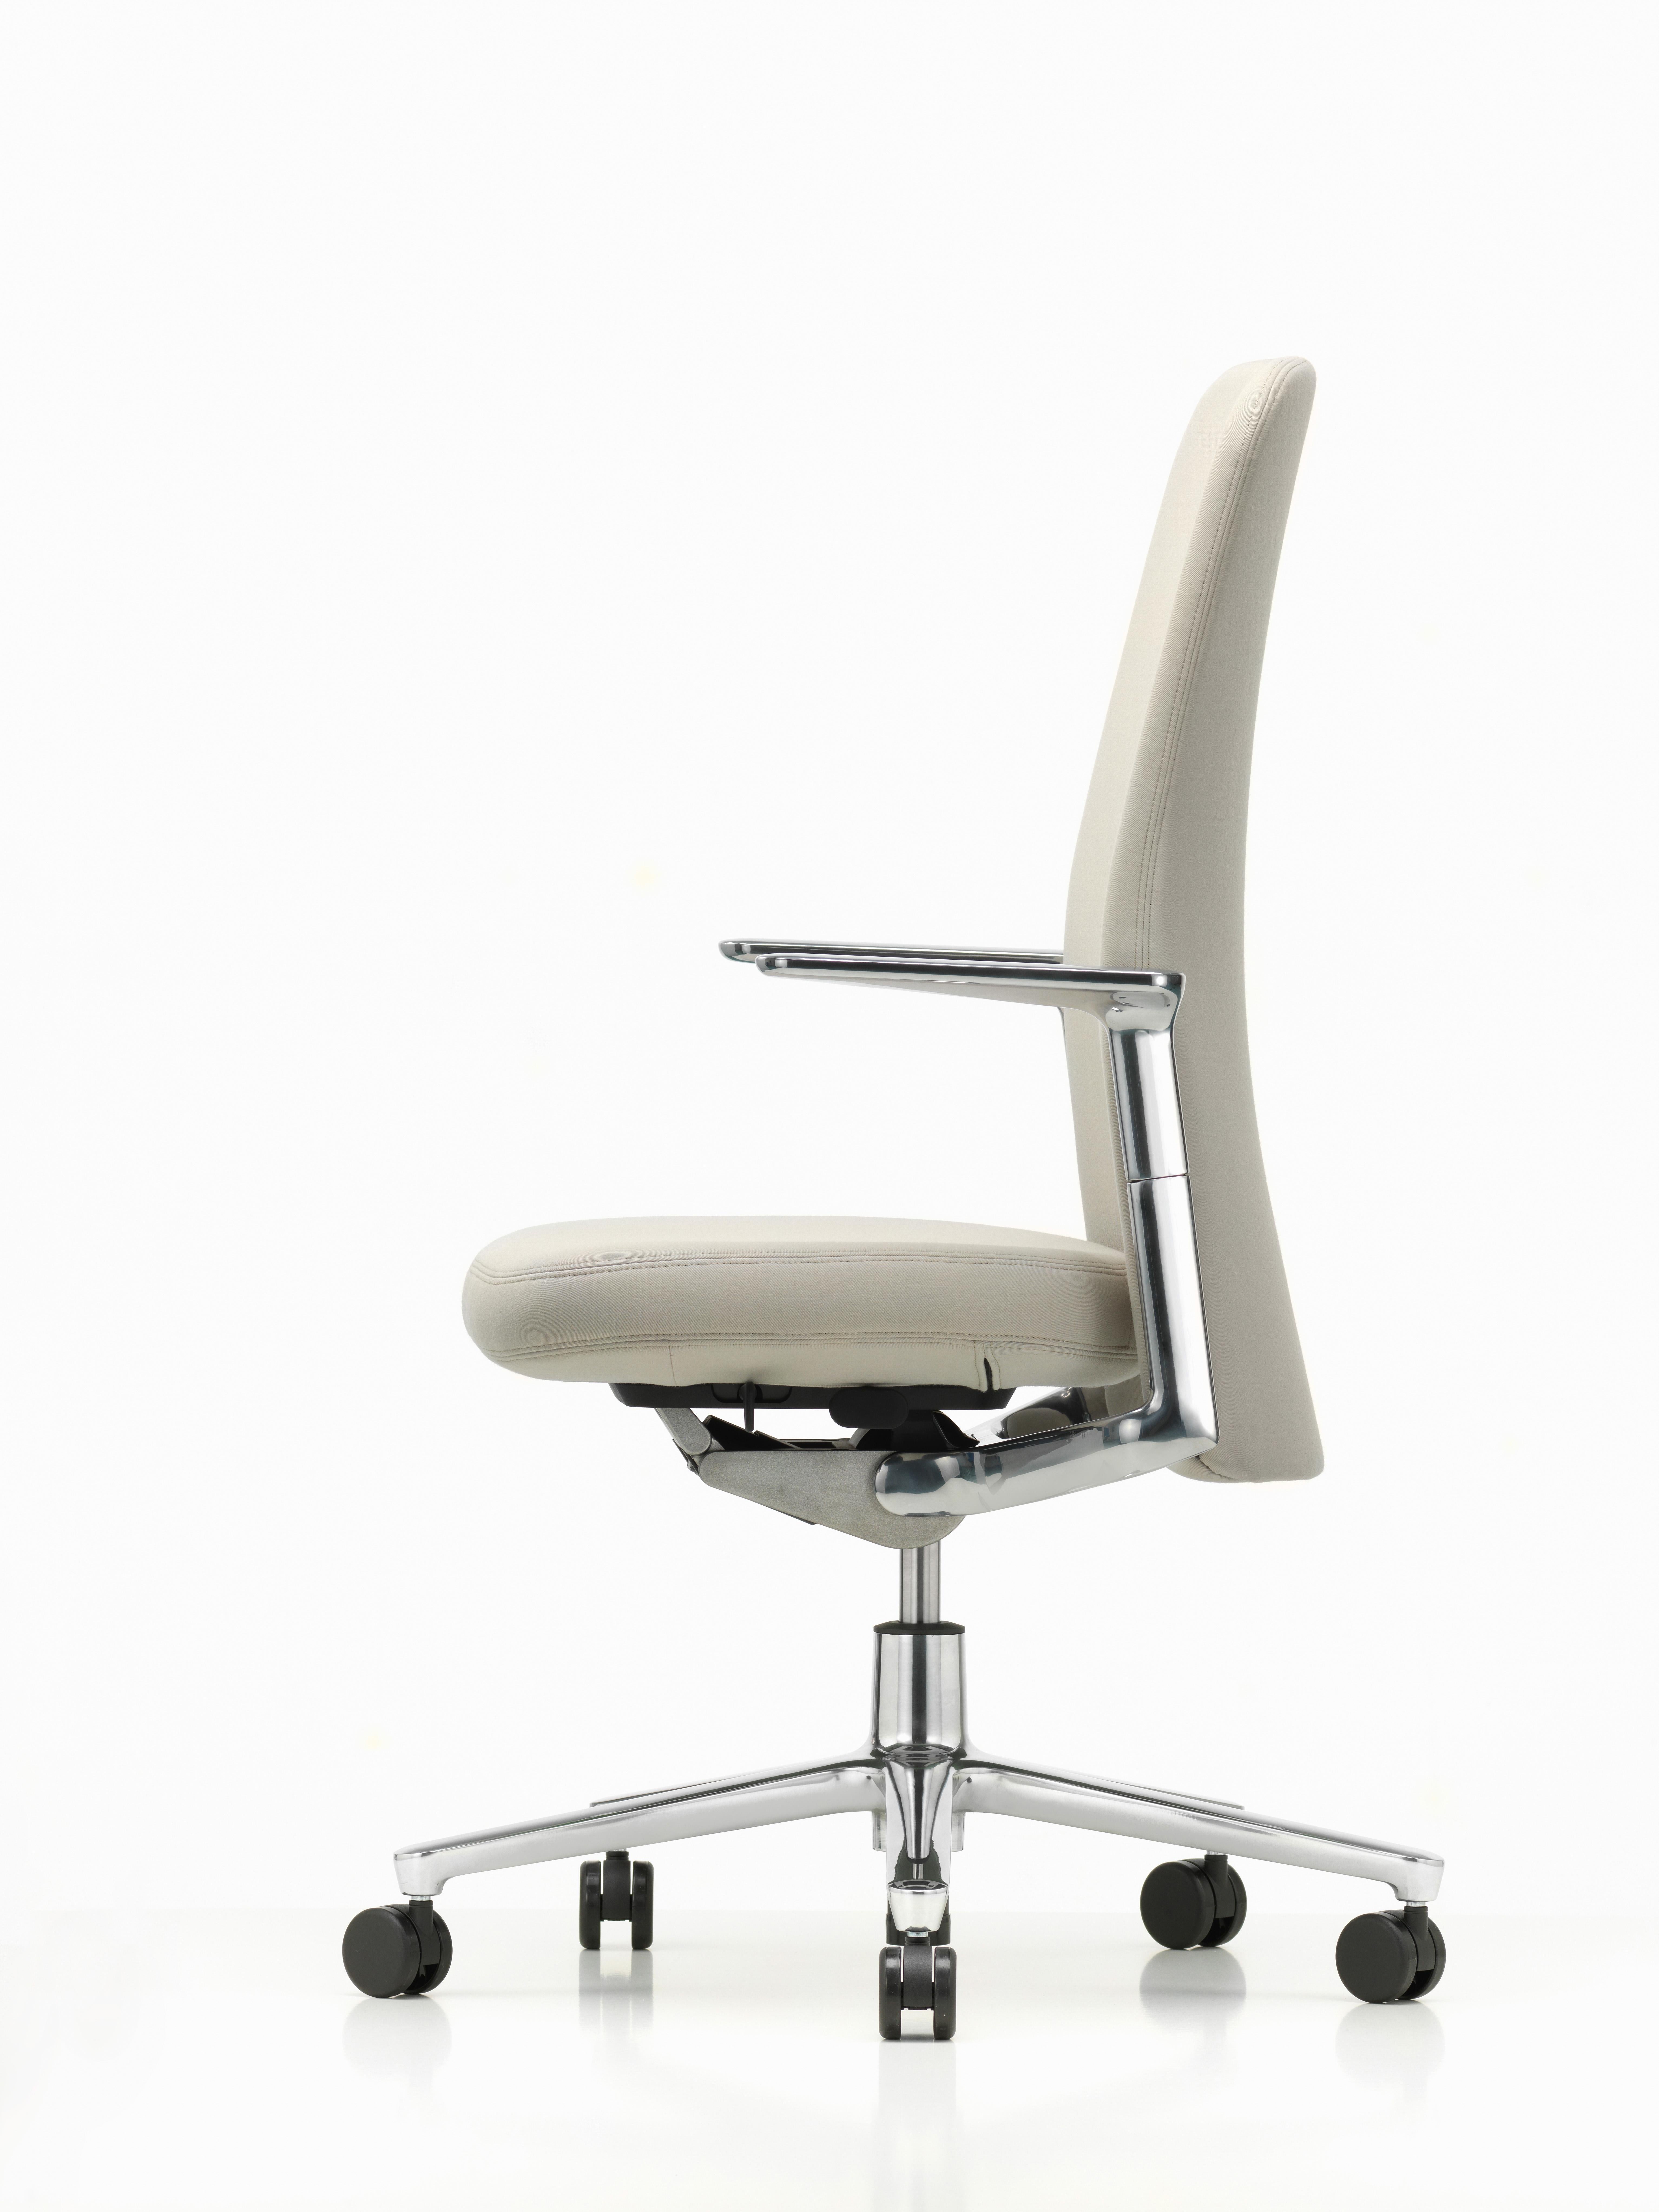 The medium-height backrest provides comfortable lumbar support, even over prolonged periods of sitting and also emanates linear simplicity. The back extends so far down that no mechanical components are visible from behind. This makes for a serene